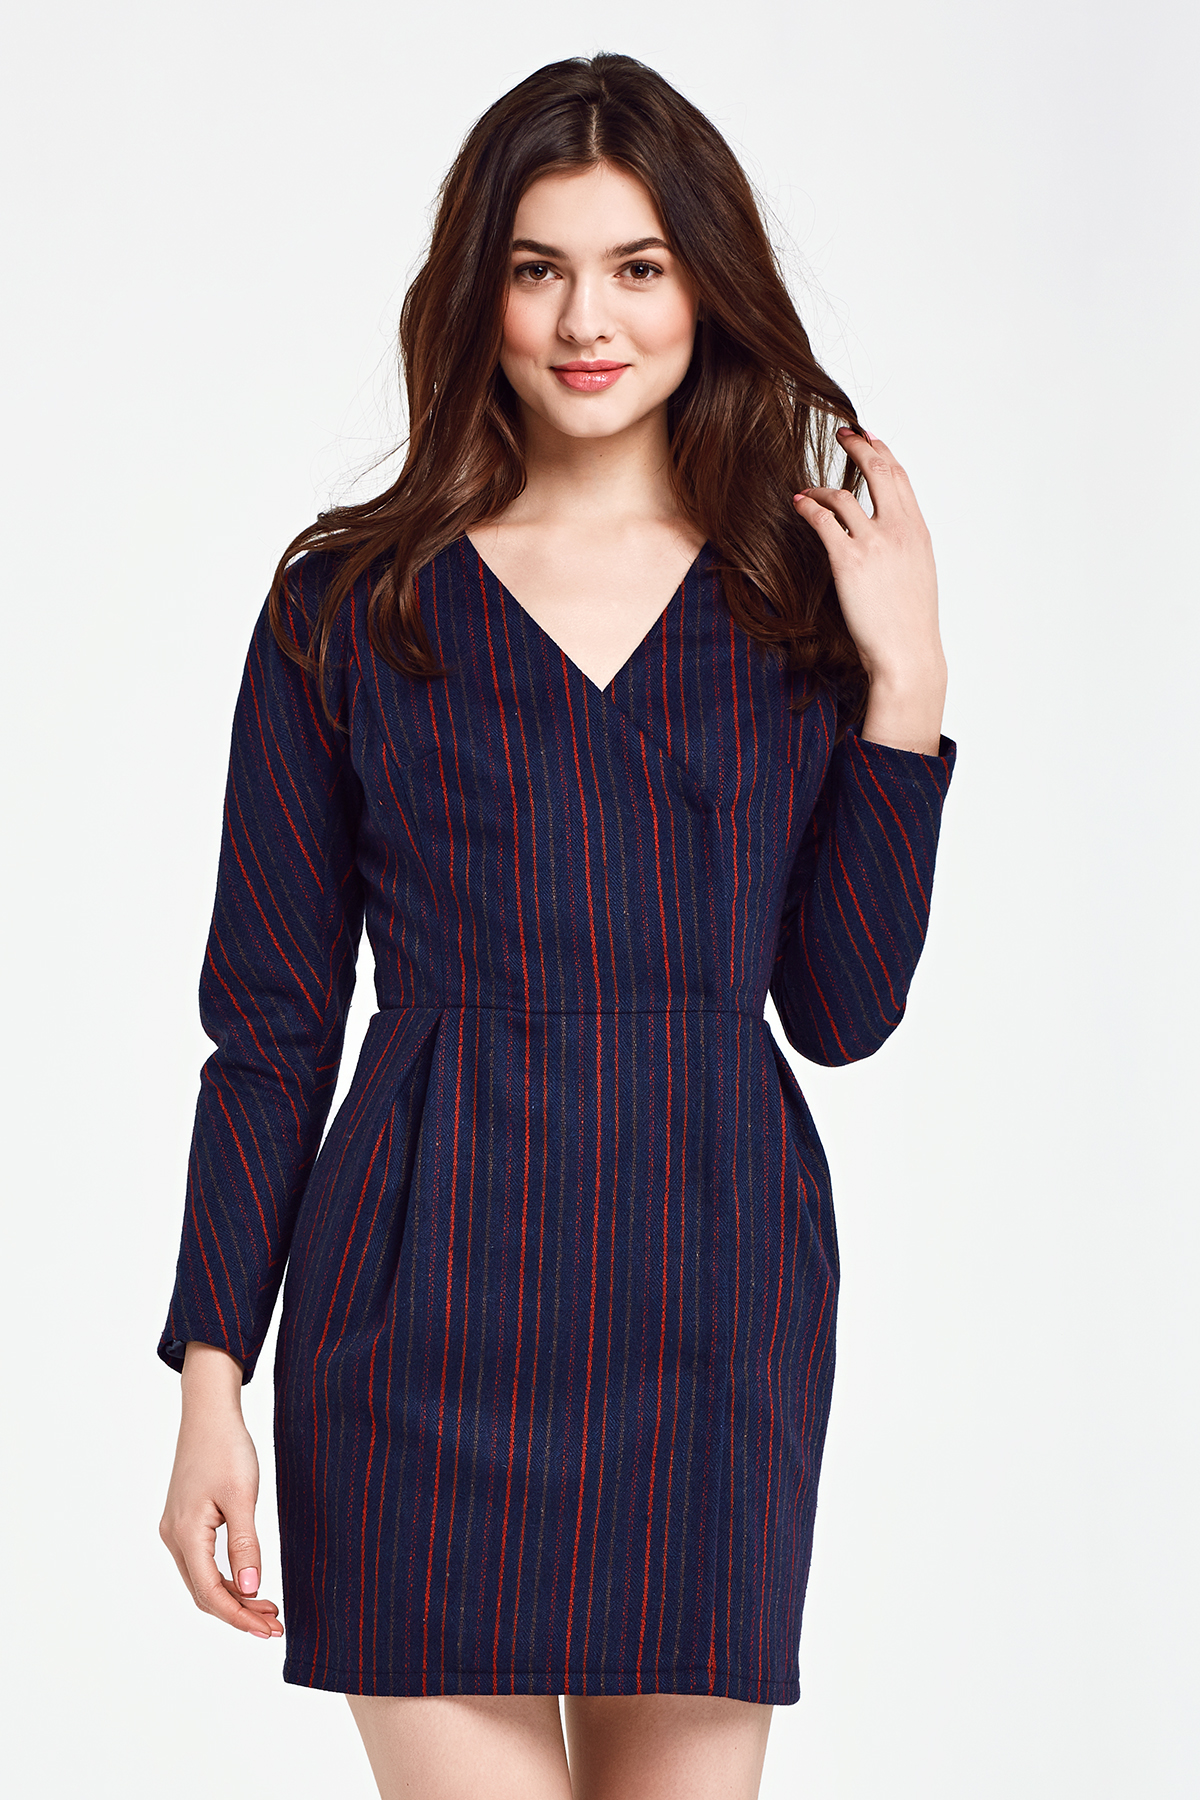 Blue dress with a wrap top and red stripes, photo 1